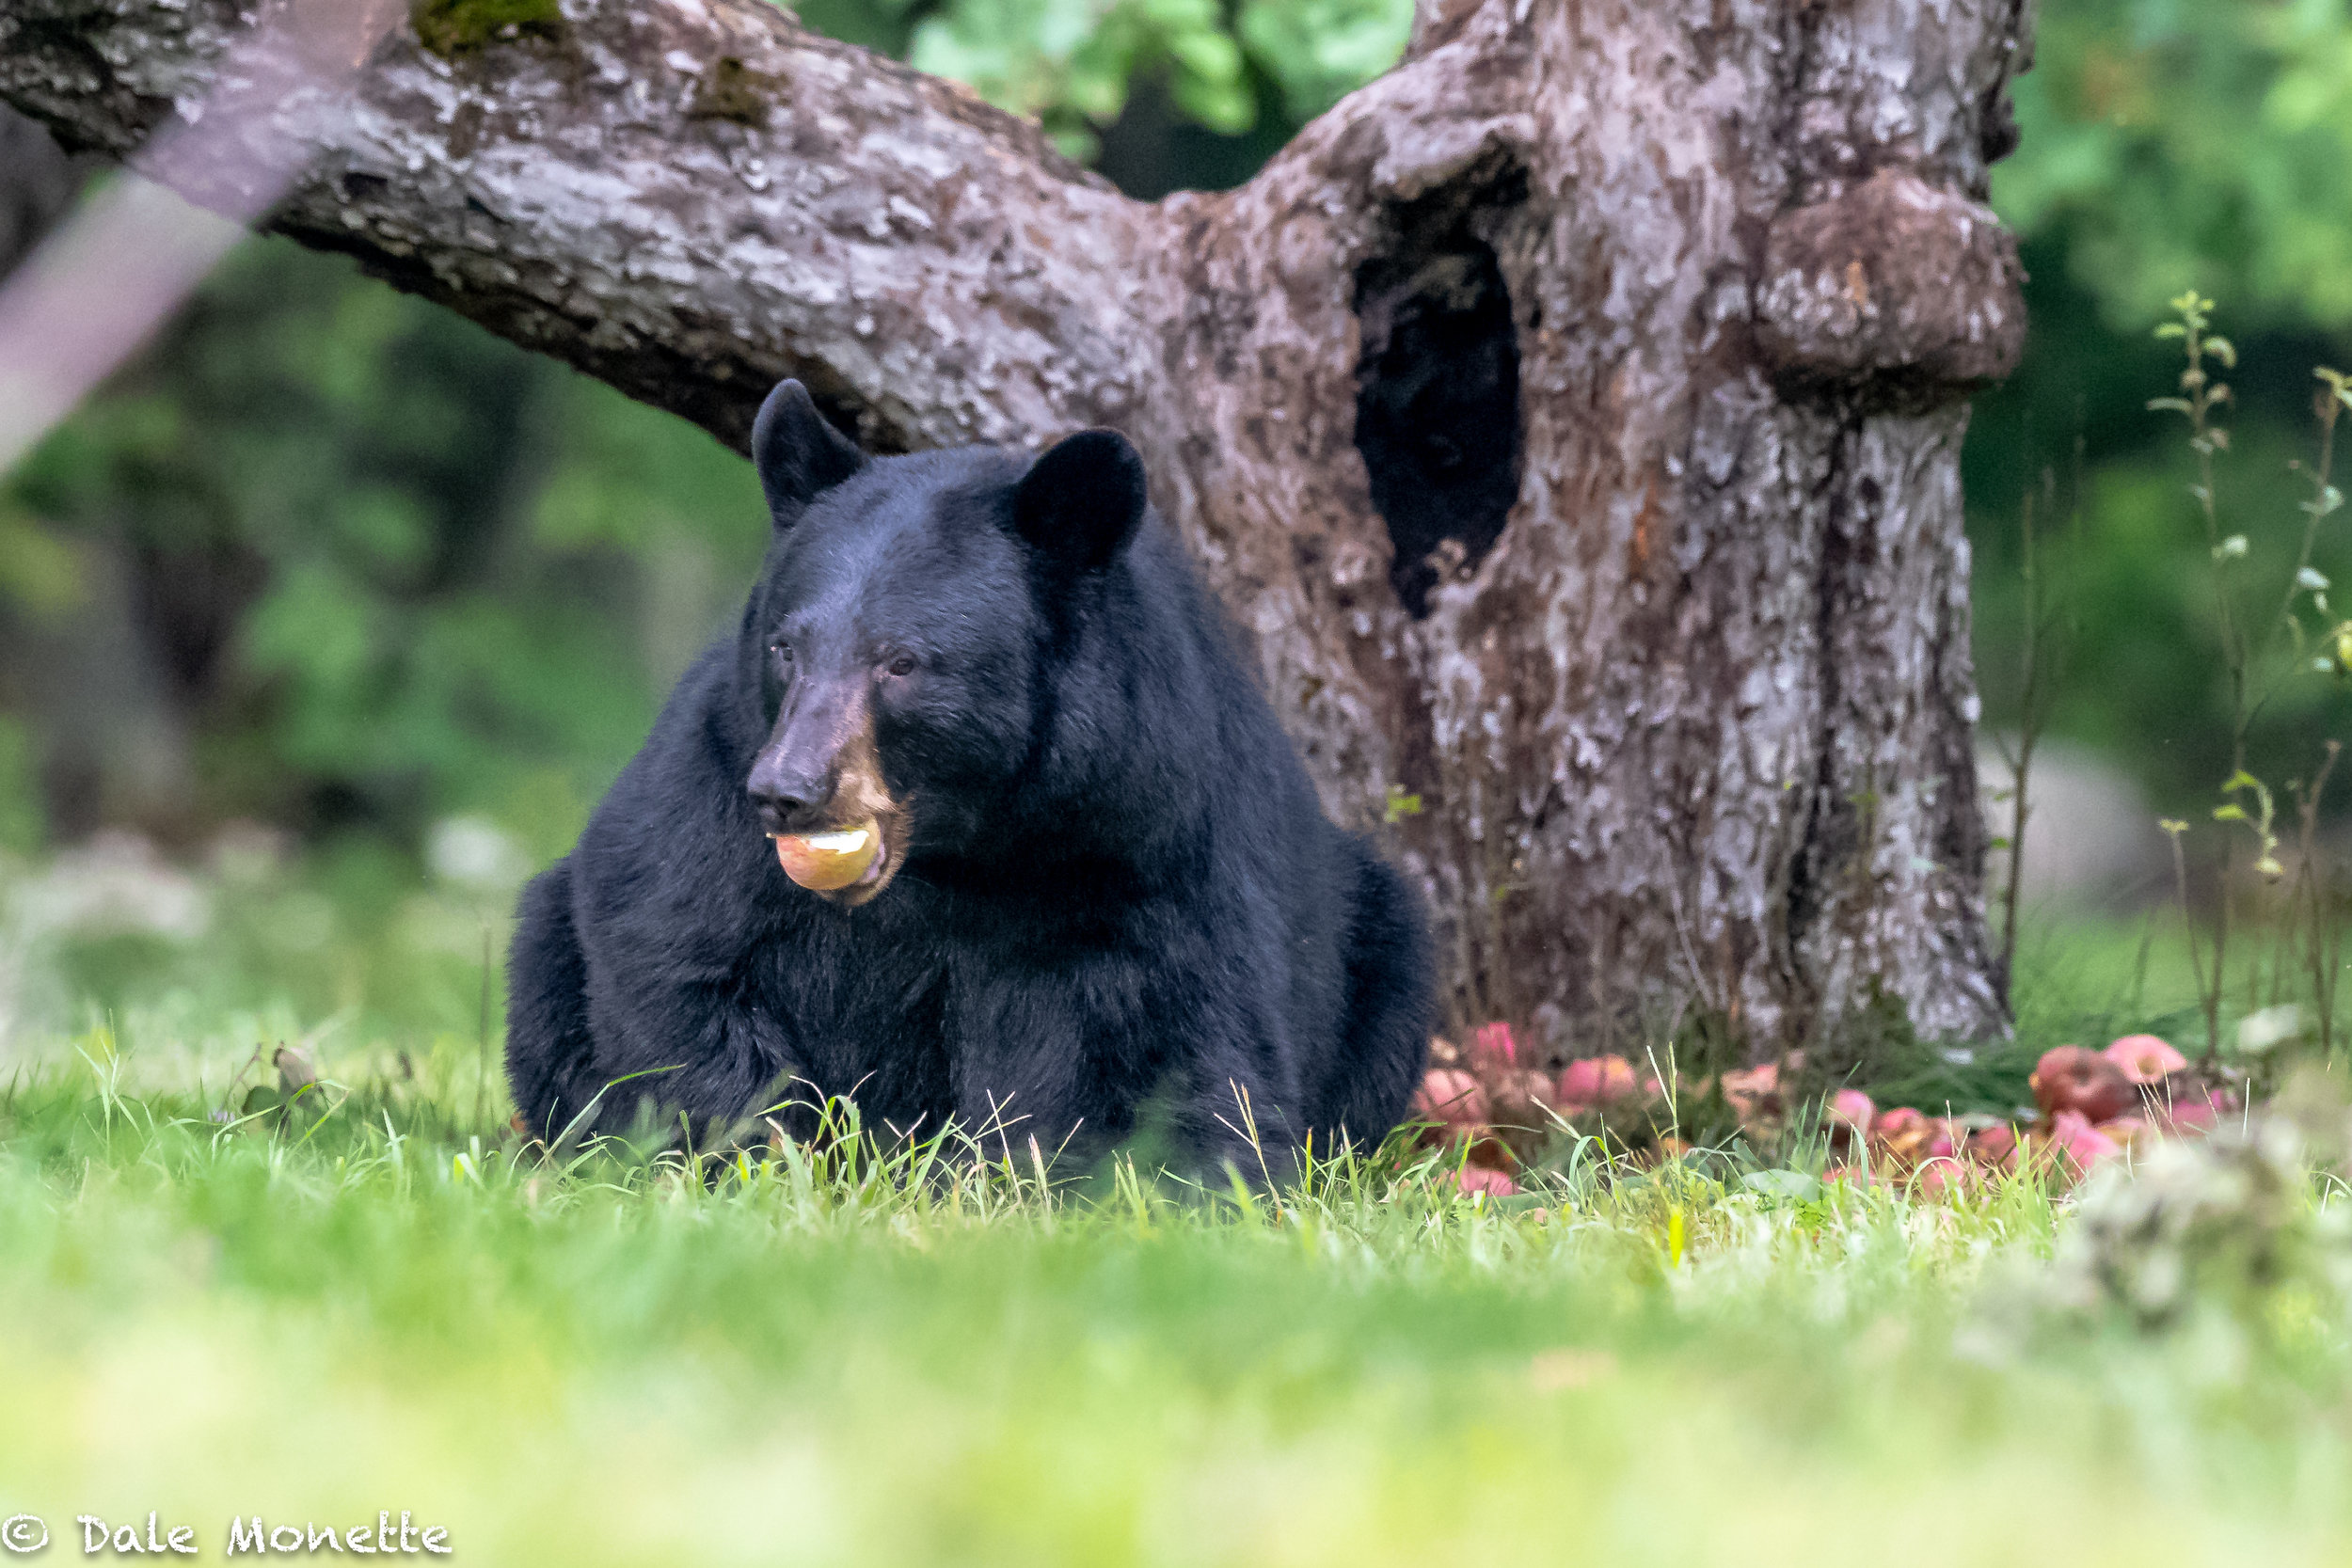   The same bear as in the last image…As you can see here, black bears love apples. This bear found the mother lode ! A black bear can eat a bushel (46 pounds) in one setting.  I’d puke !!   